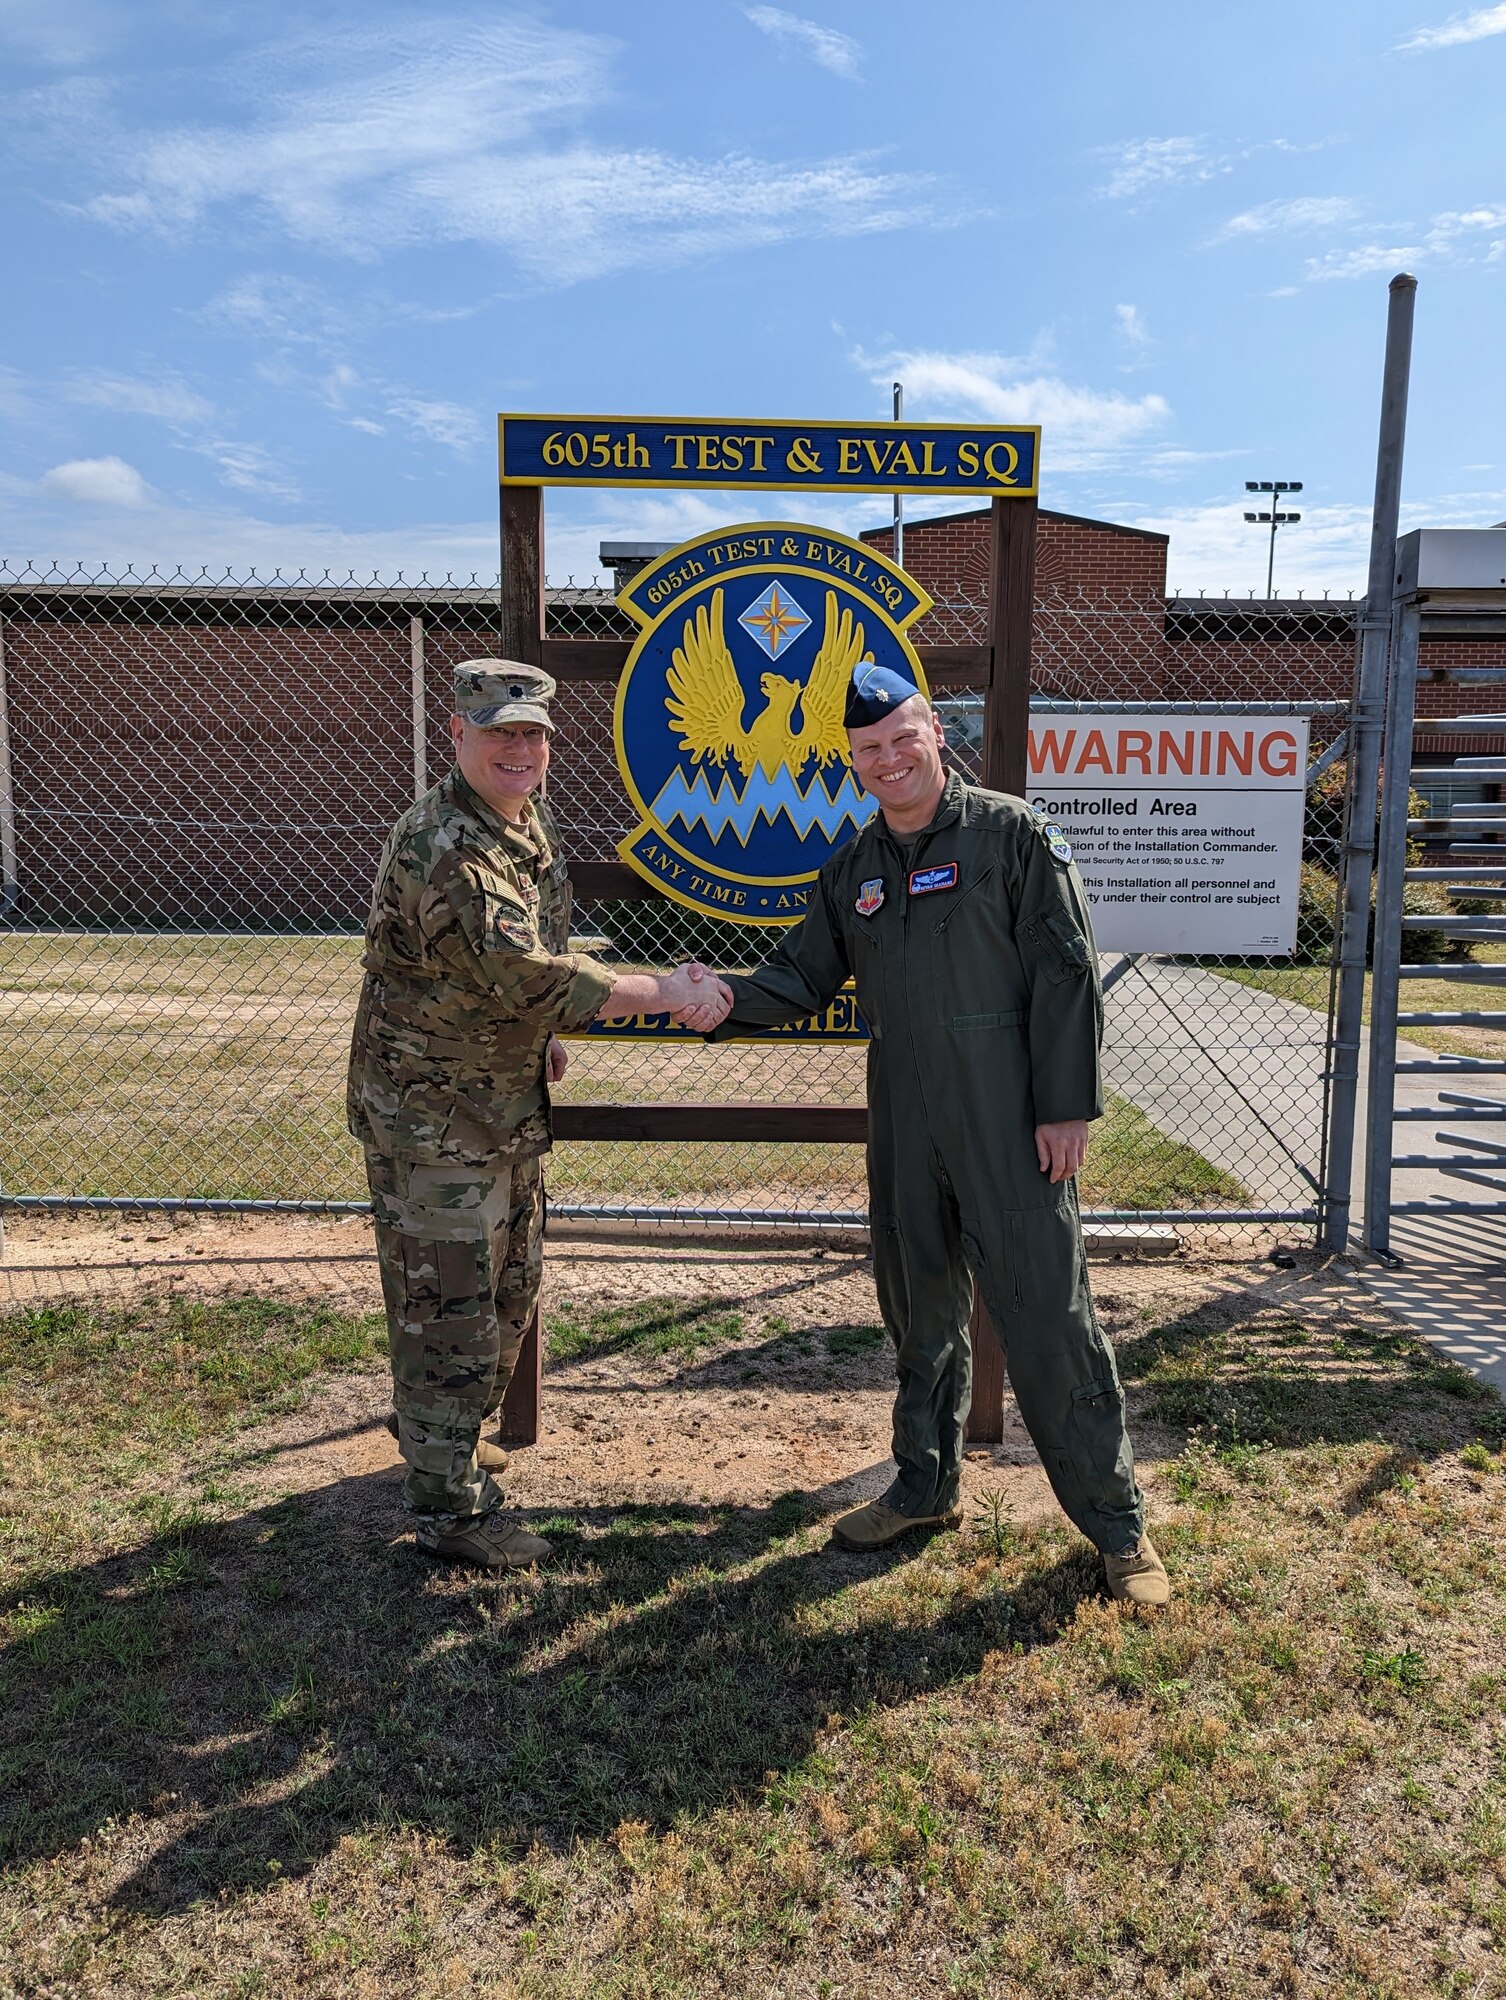 photo of two uniformed U.S. Air Force Airman shaking hands outside gated area next to sign “605th Test and Evaluation Squadron Detachment 2” with unit’s emblem in the center of the sign which states “605th Test & Eval Sq, any time, any place.”